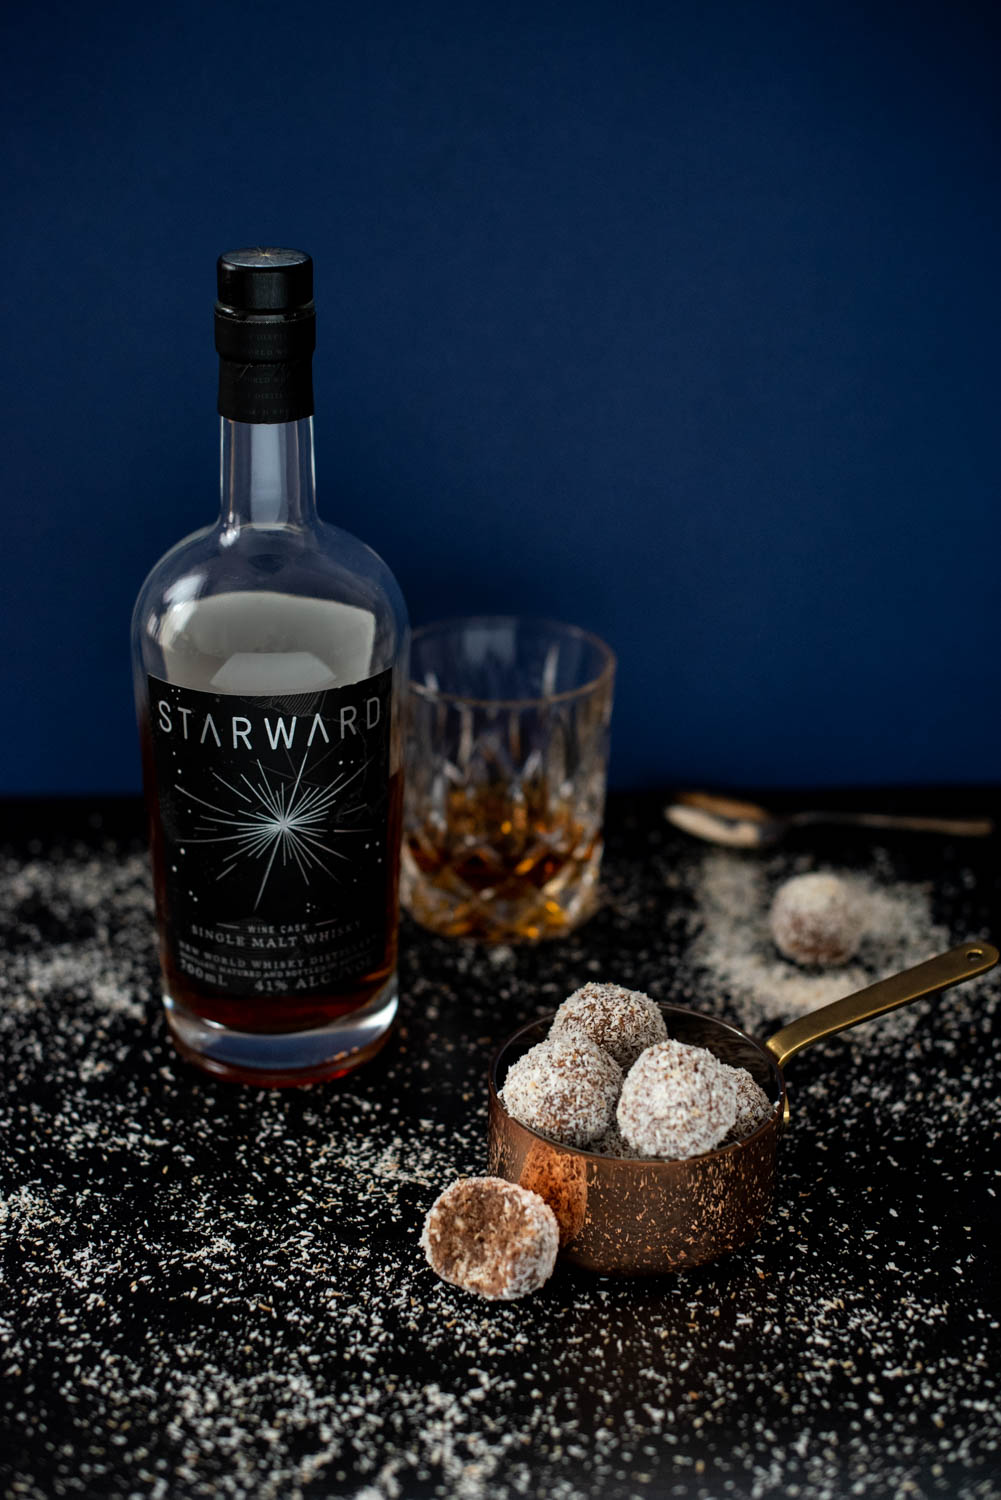 Whisky balls covered in toasted coconut with a Riddle glass holding whisky and a bottle of Starward wine cask whisky in the background